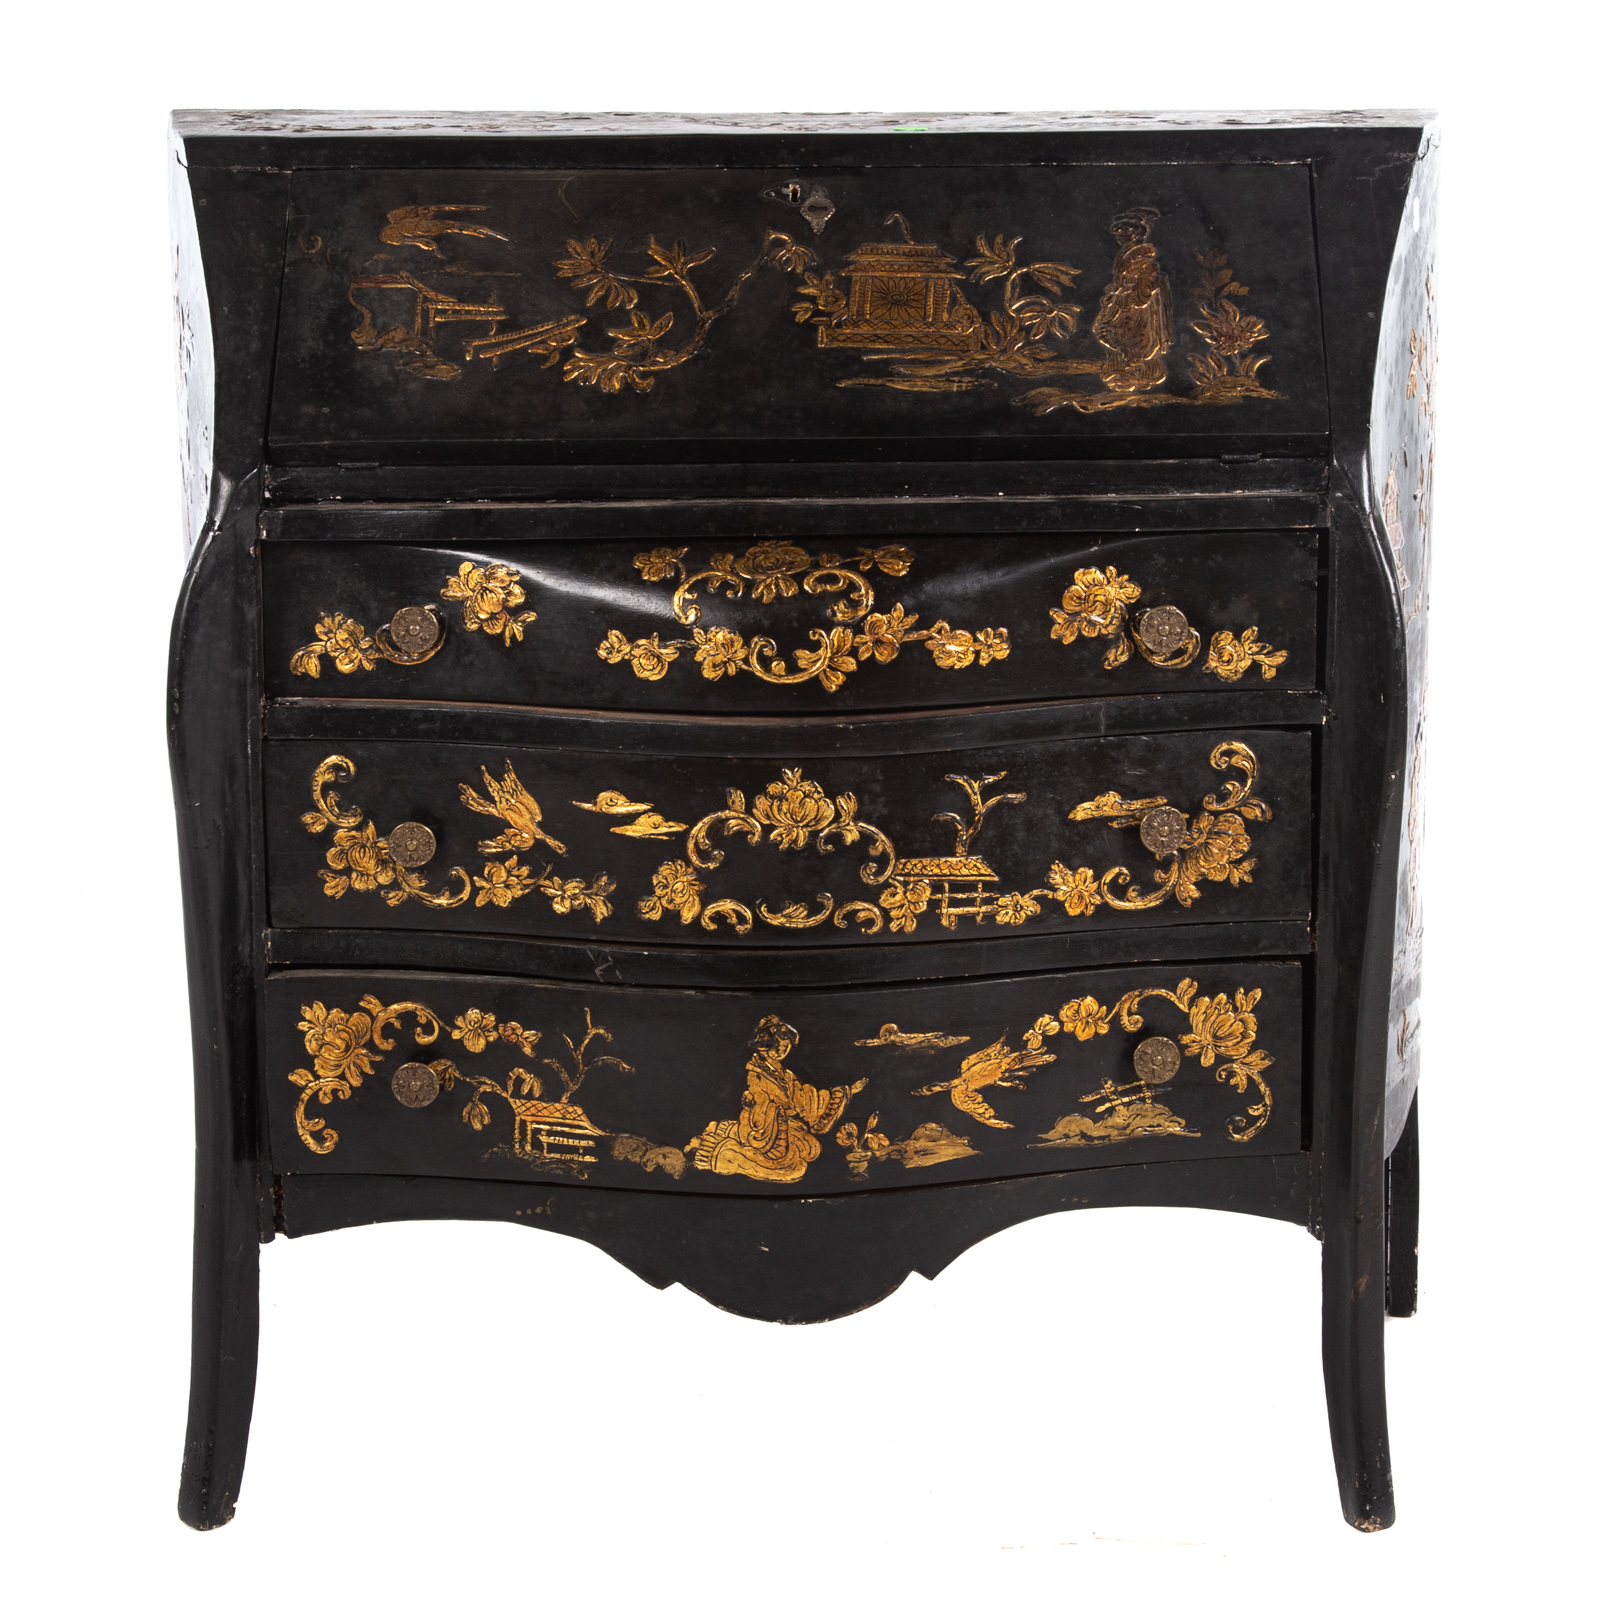 LOUIS XVI STYLE JAPANNED FALL FRONT 3cadf0